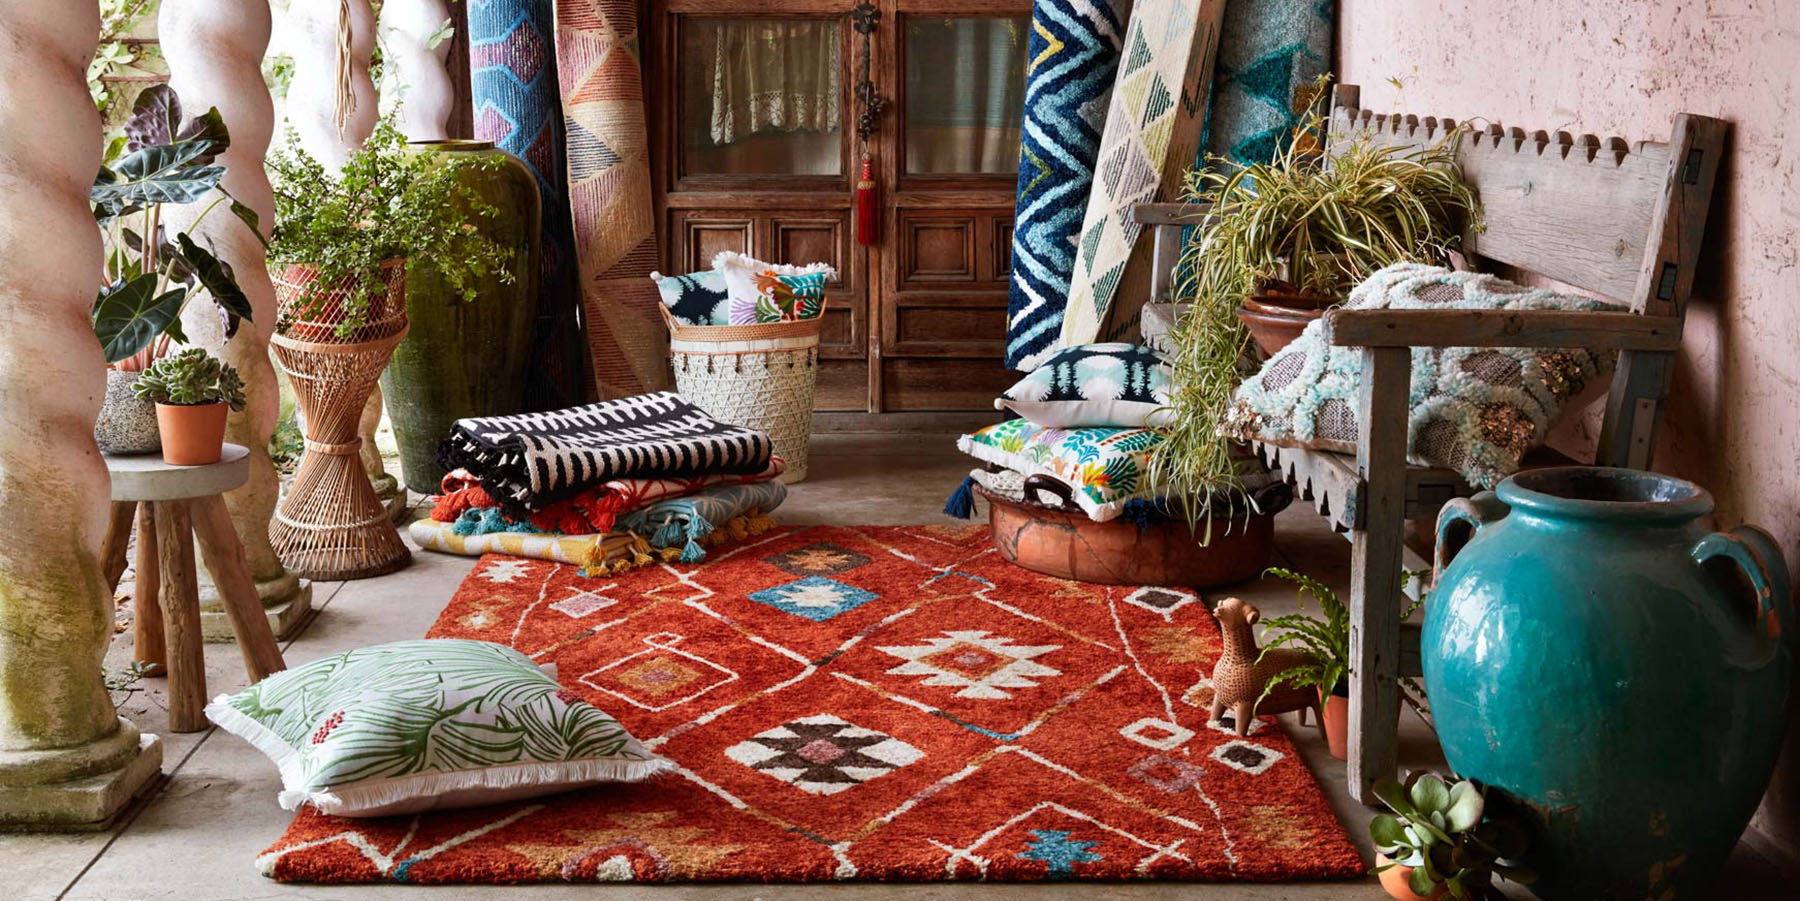 Allred Collaborative's Textiles Collection, including Rugs, Pillows and Throws